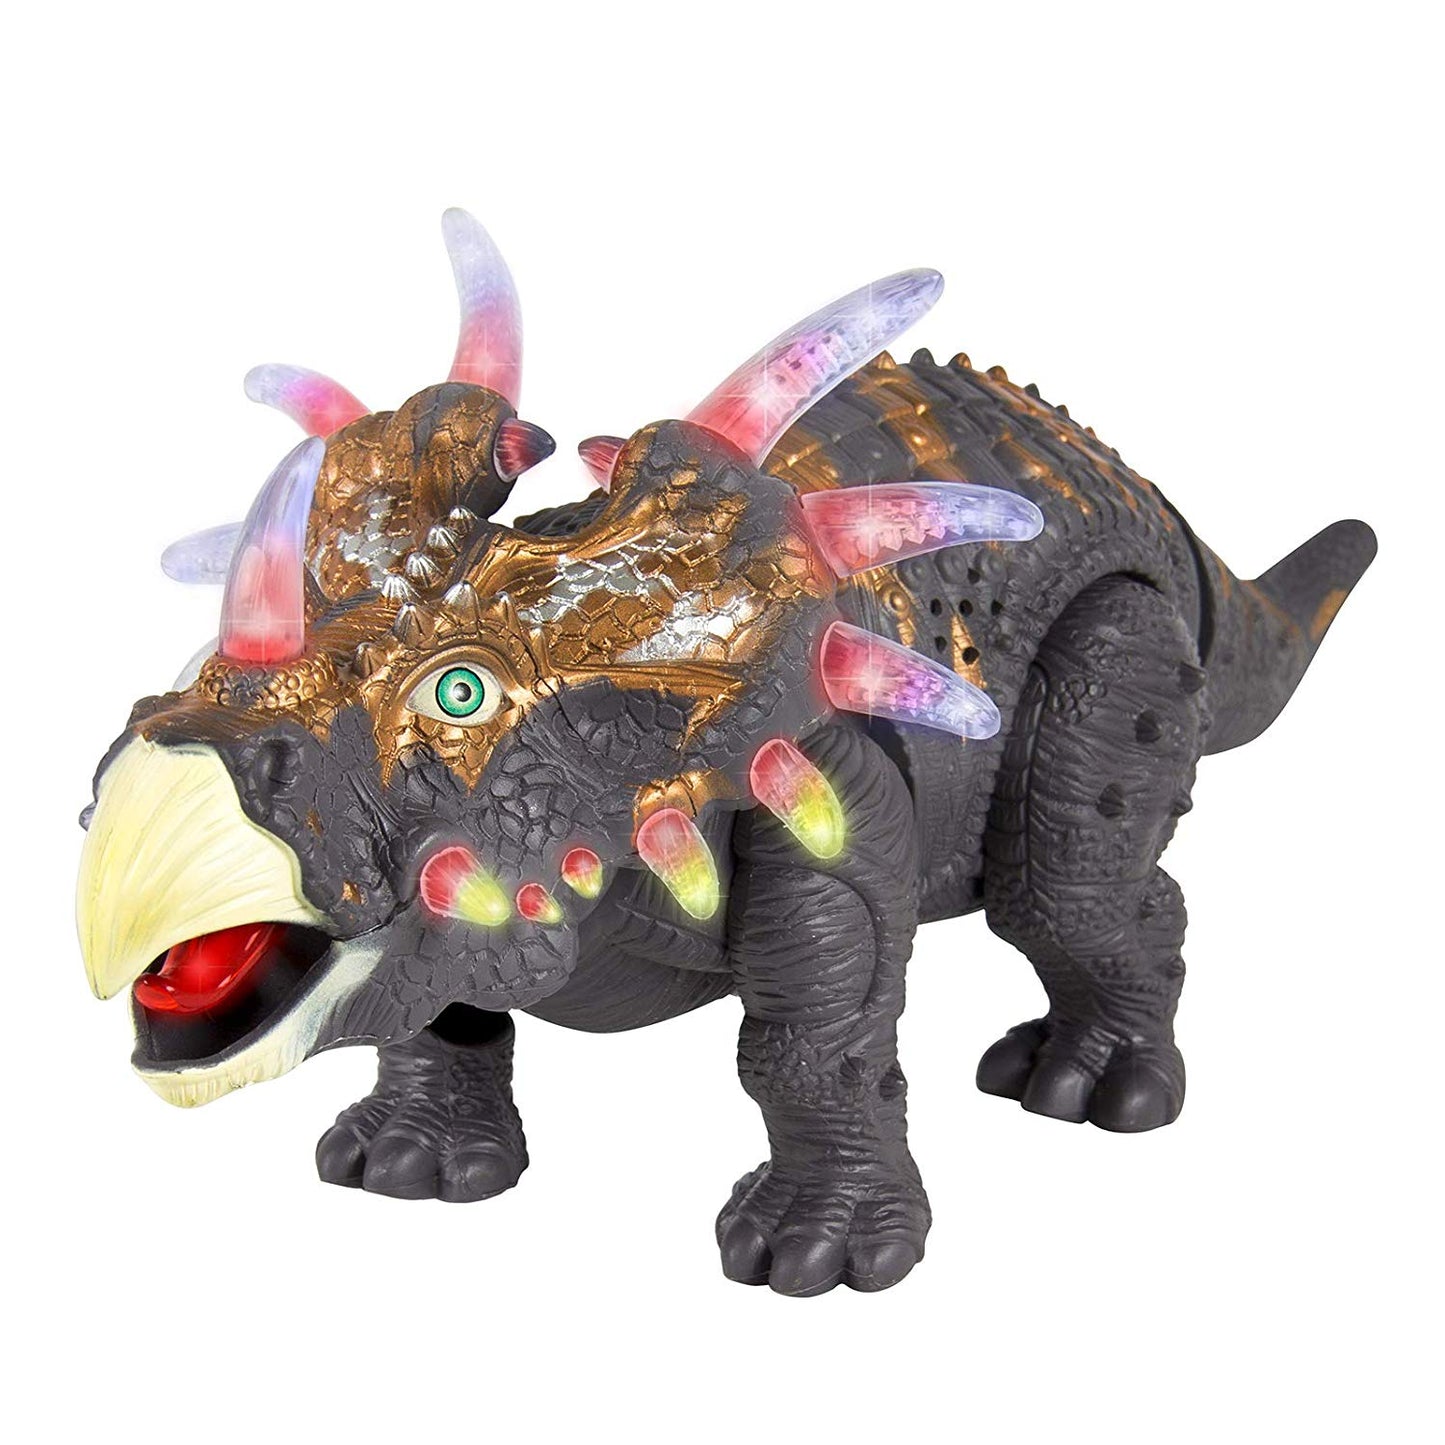 14in Kids Interactive Walking Moving Triceratops Dinosaur Animal RC Toy Figure w/ Lights, Sound